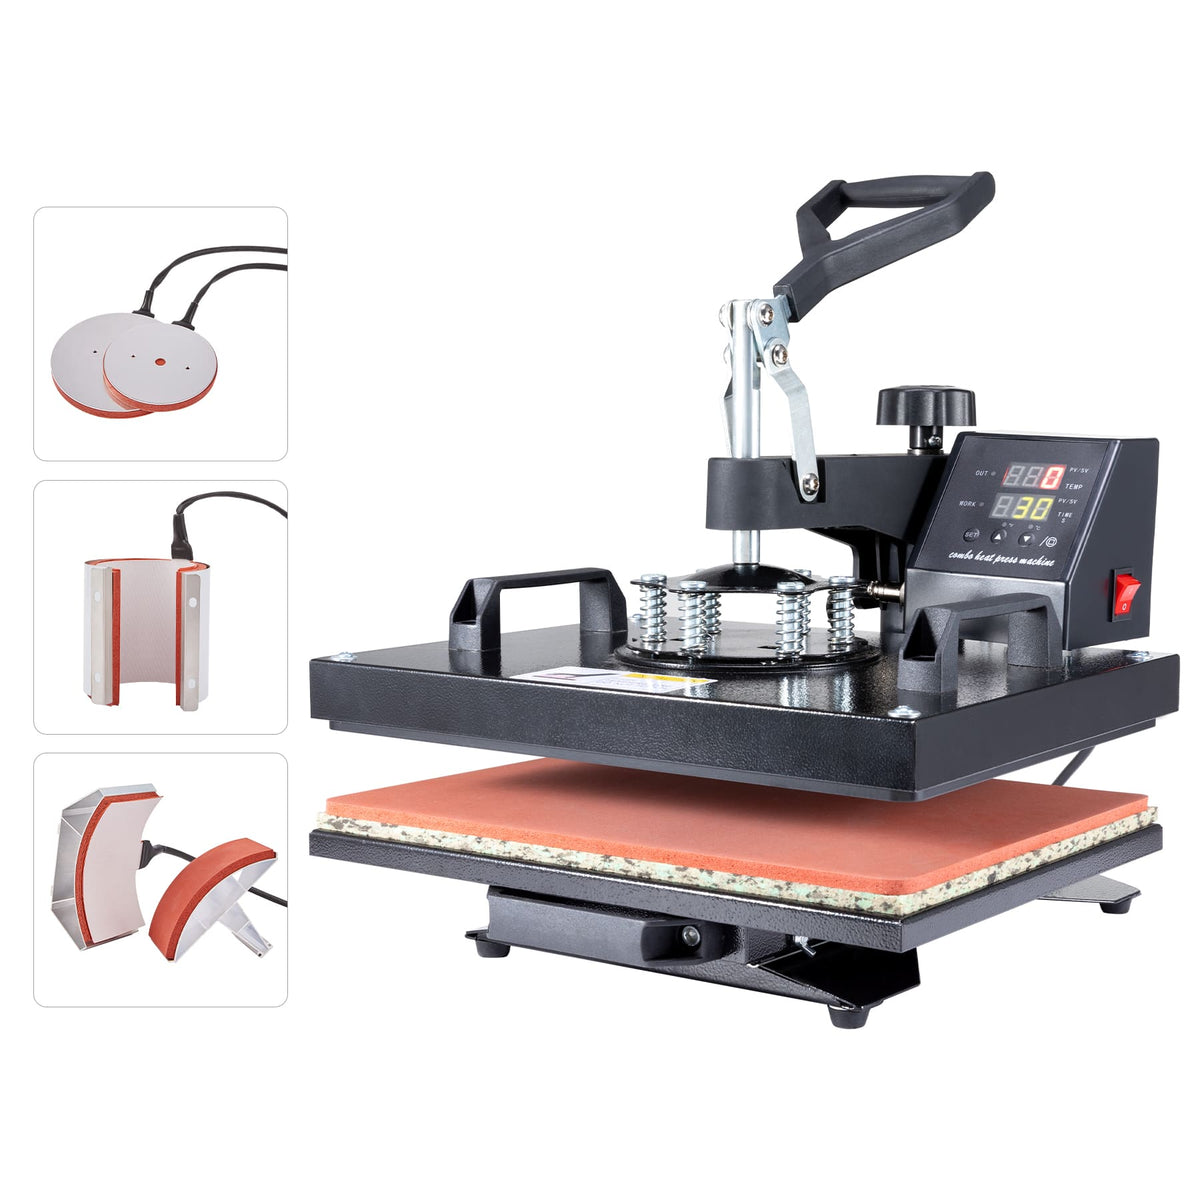 5 In 1 Vision Media Combo Heat Press Machine at Rs 8000